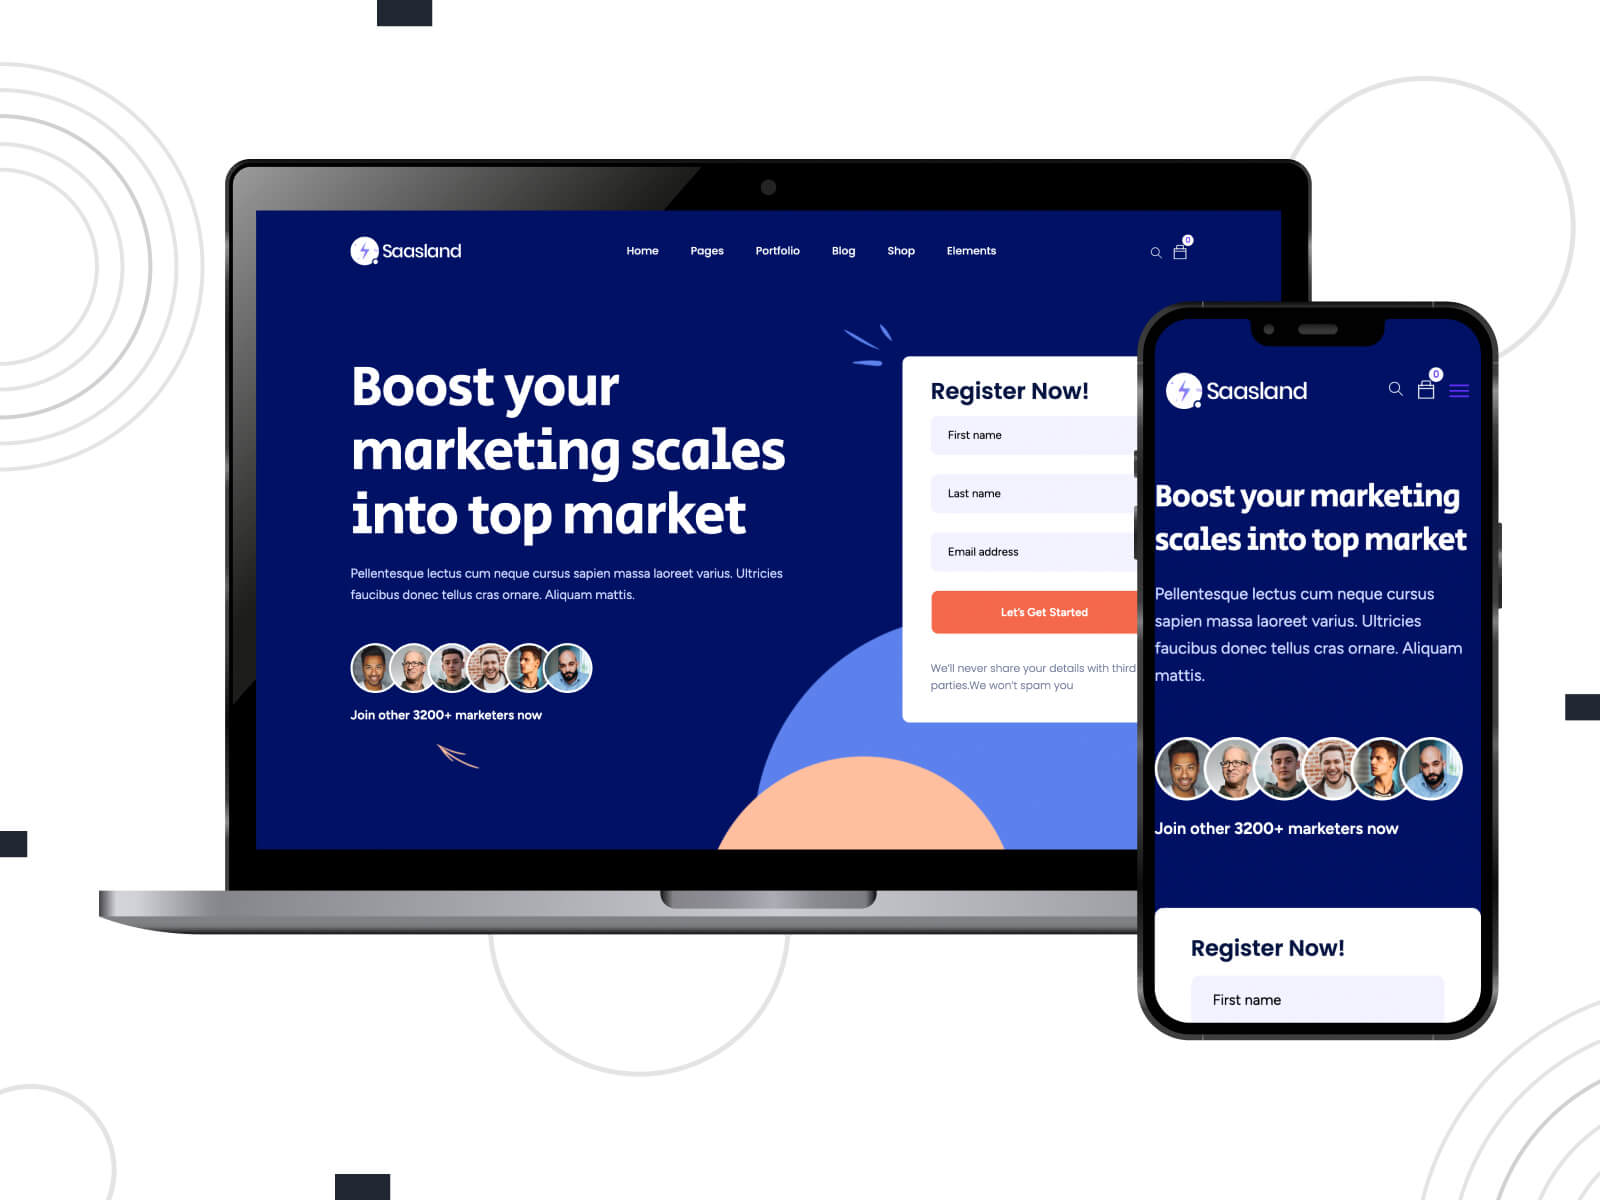 Snapshot of Ssaasland - dim, warm, featuring an extensive icon library, this theme provides visual enhancements among multipurpose WordPress themes in midnight blue, tomato, and corn flowerblue color mix.